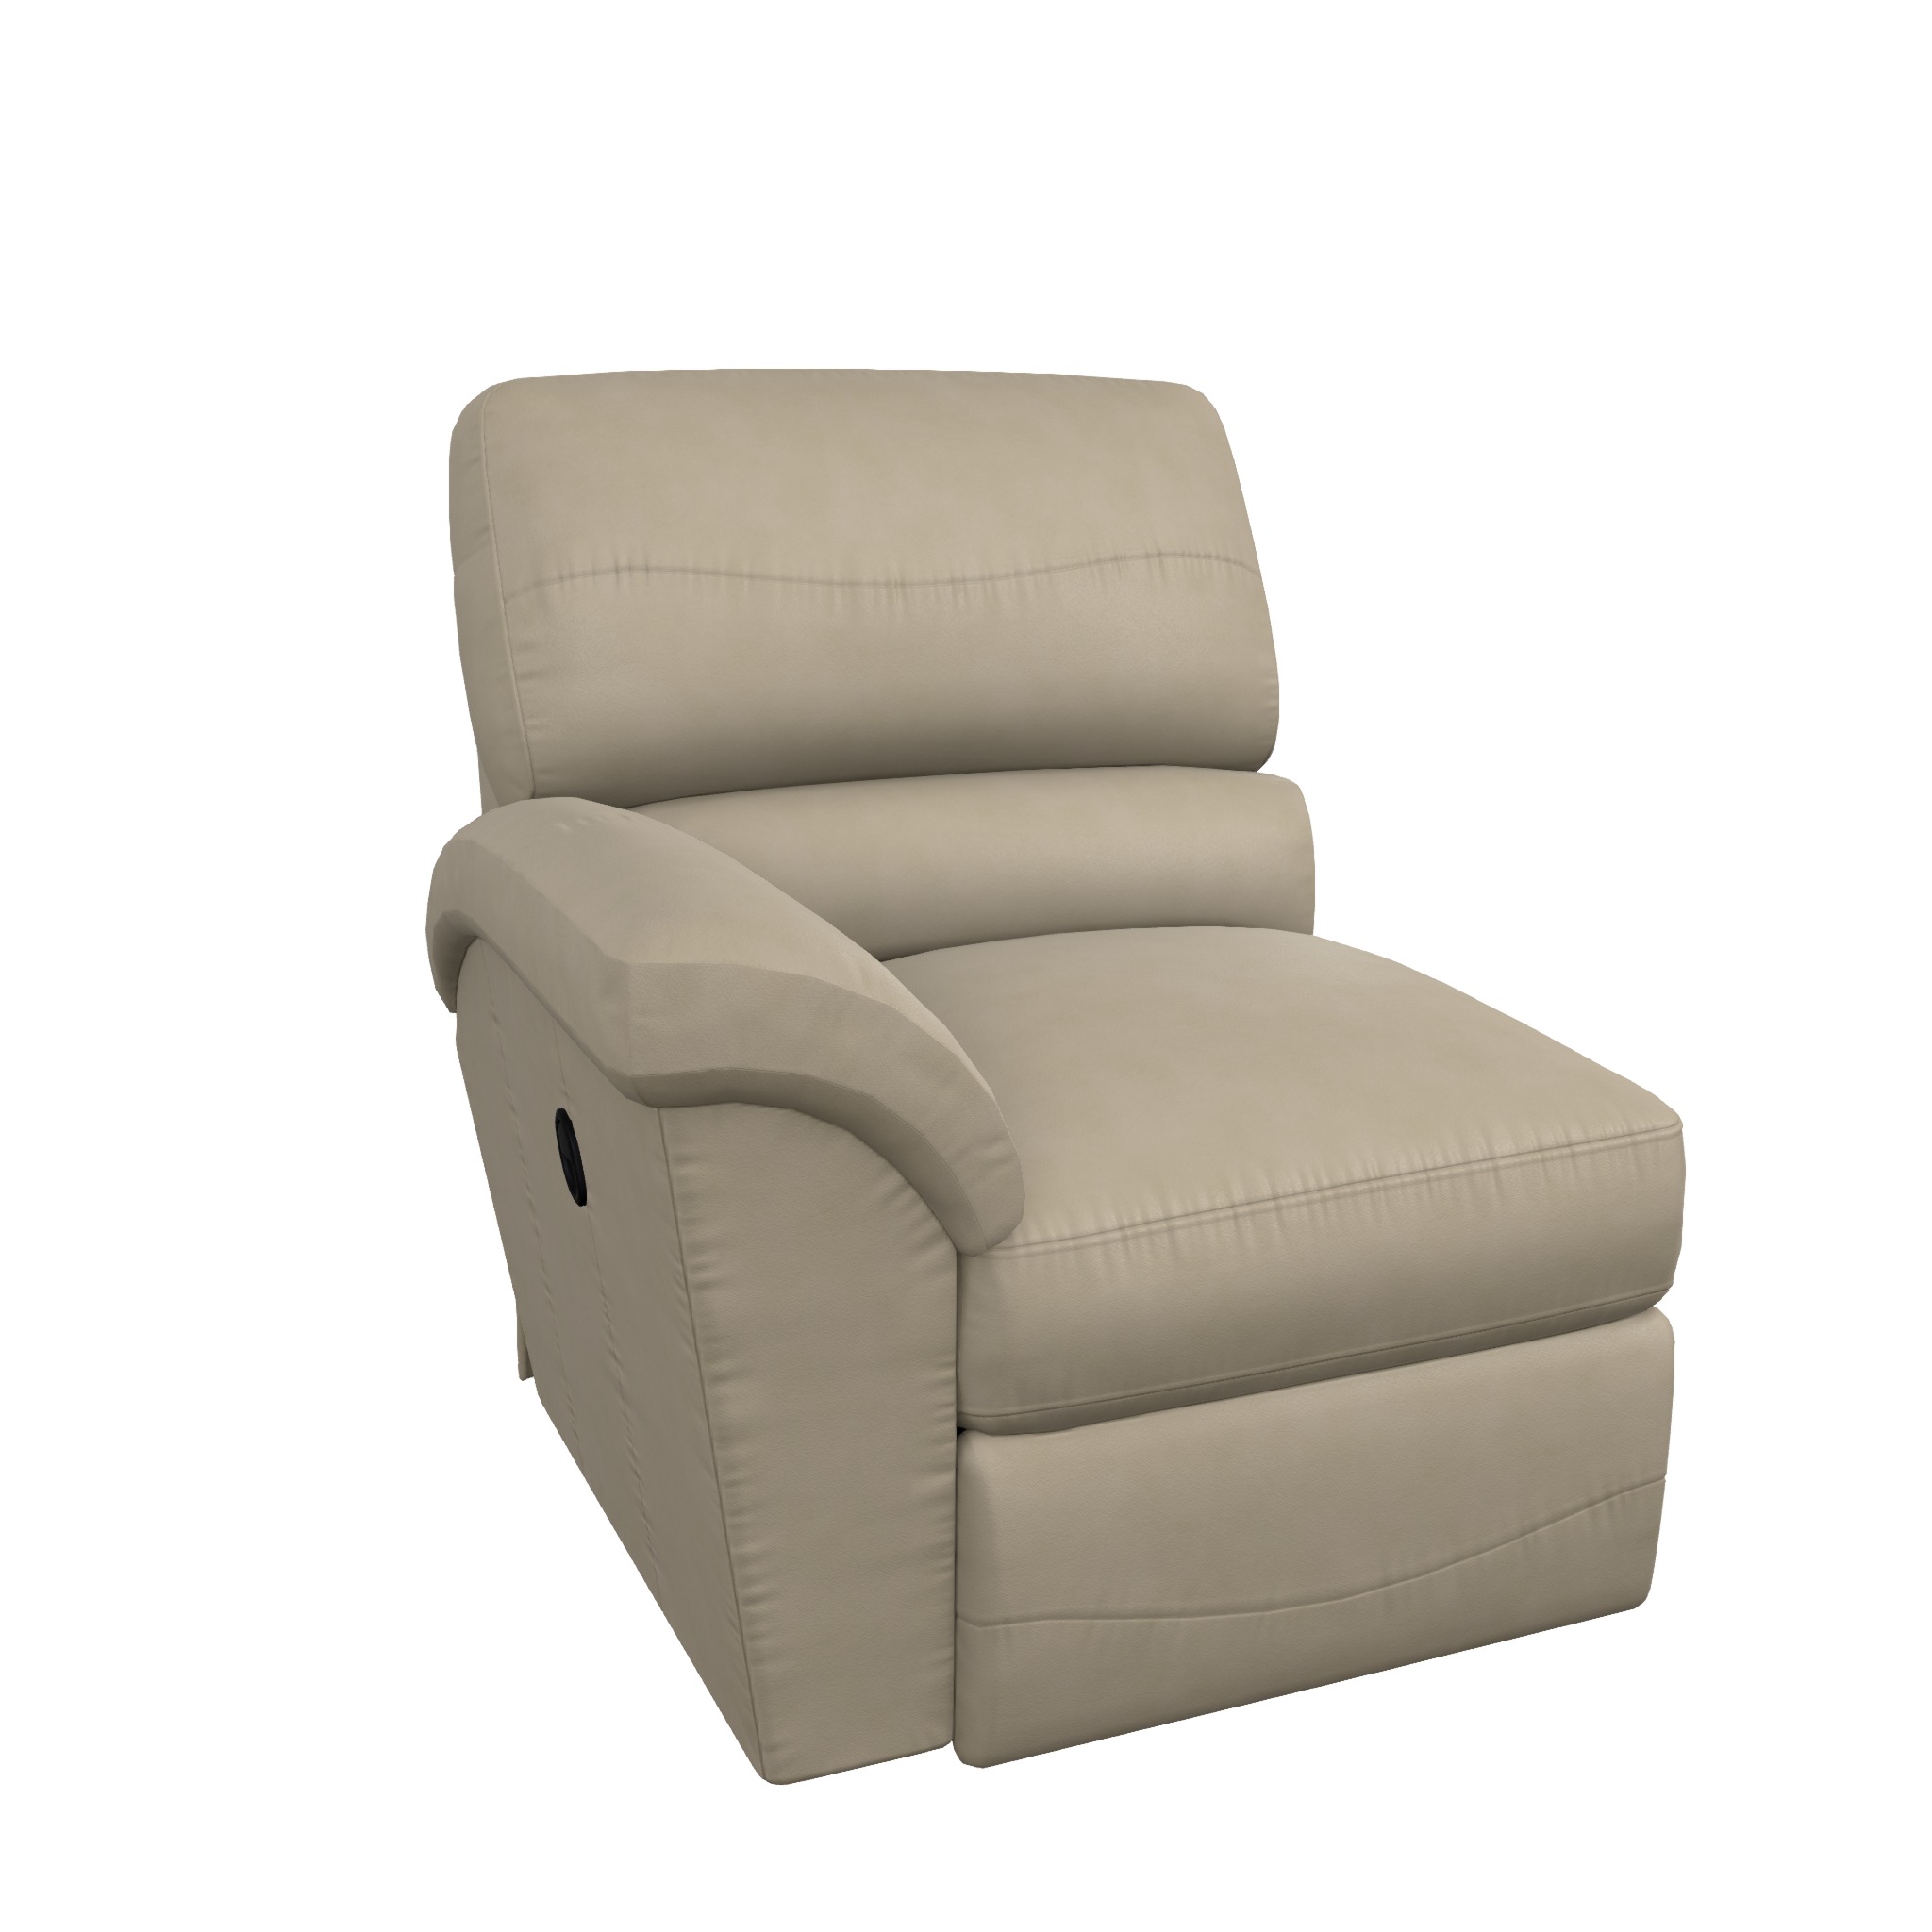 Image - 1 - Reese Leather PowerRecline Right-Arm Sitting Recliner